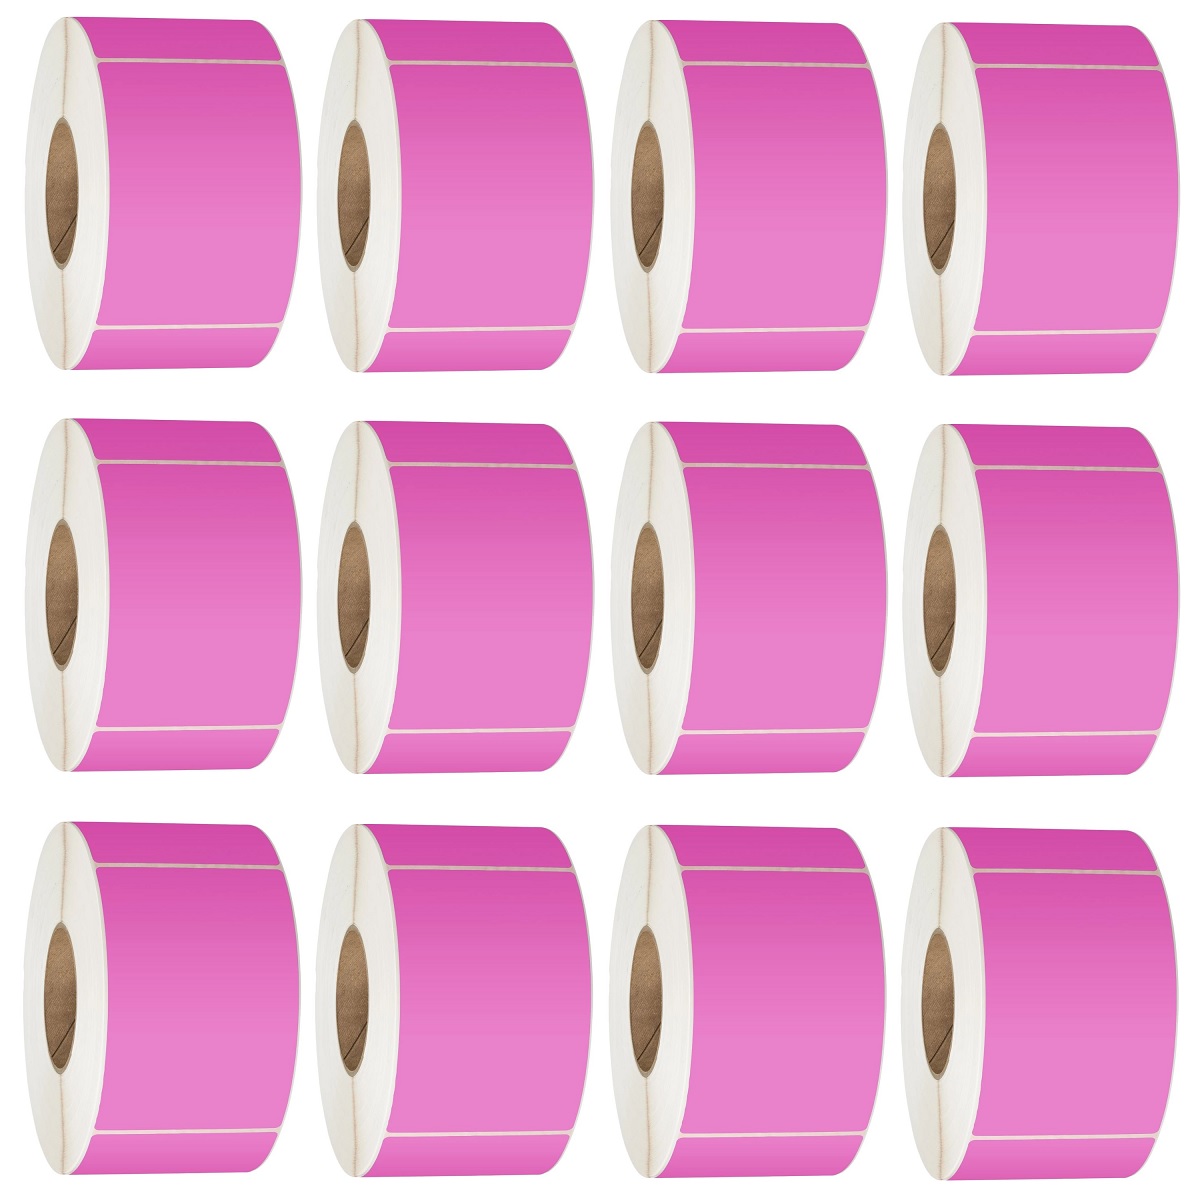 76X48 Thermal Transfer Labels 3000/Roll 76mm Core Pink - 12 Rolls